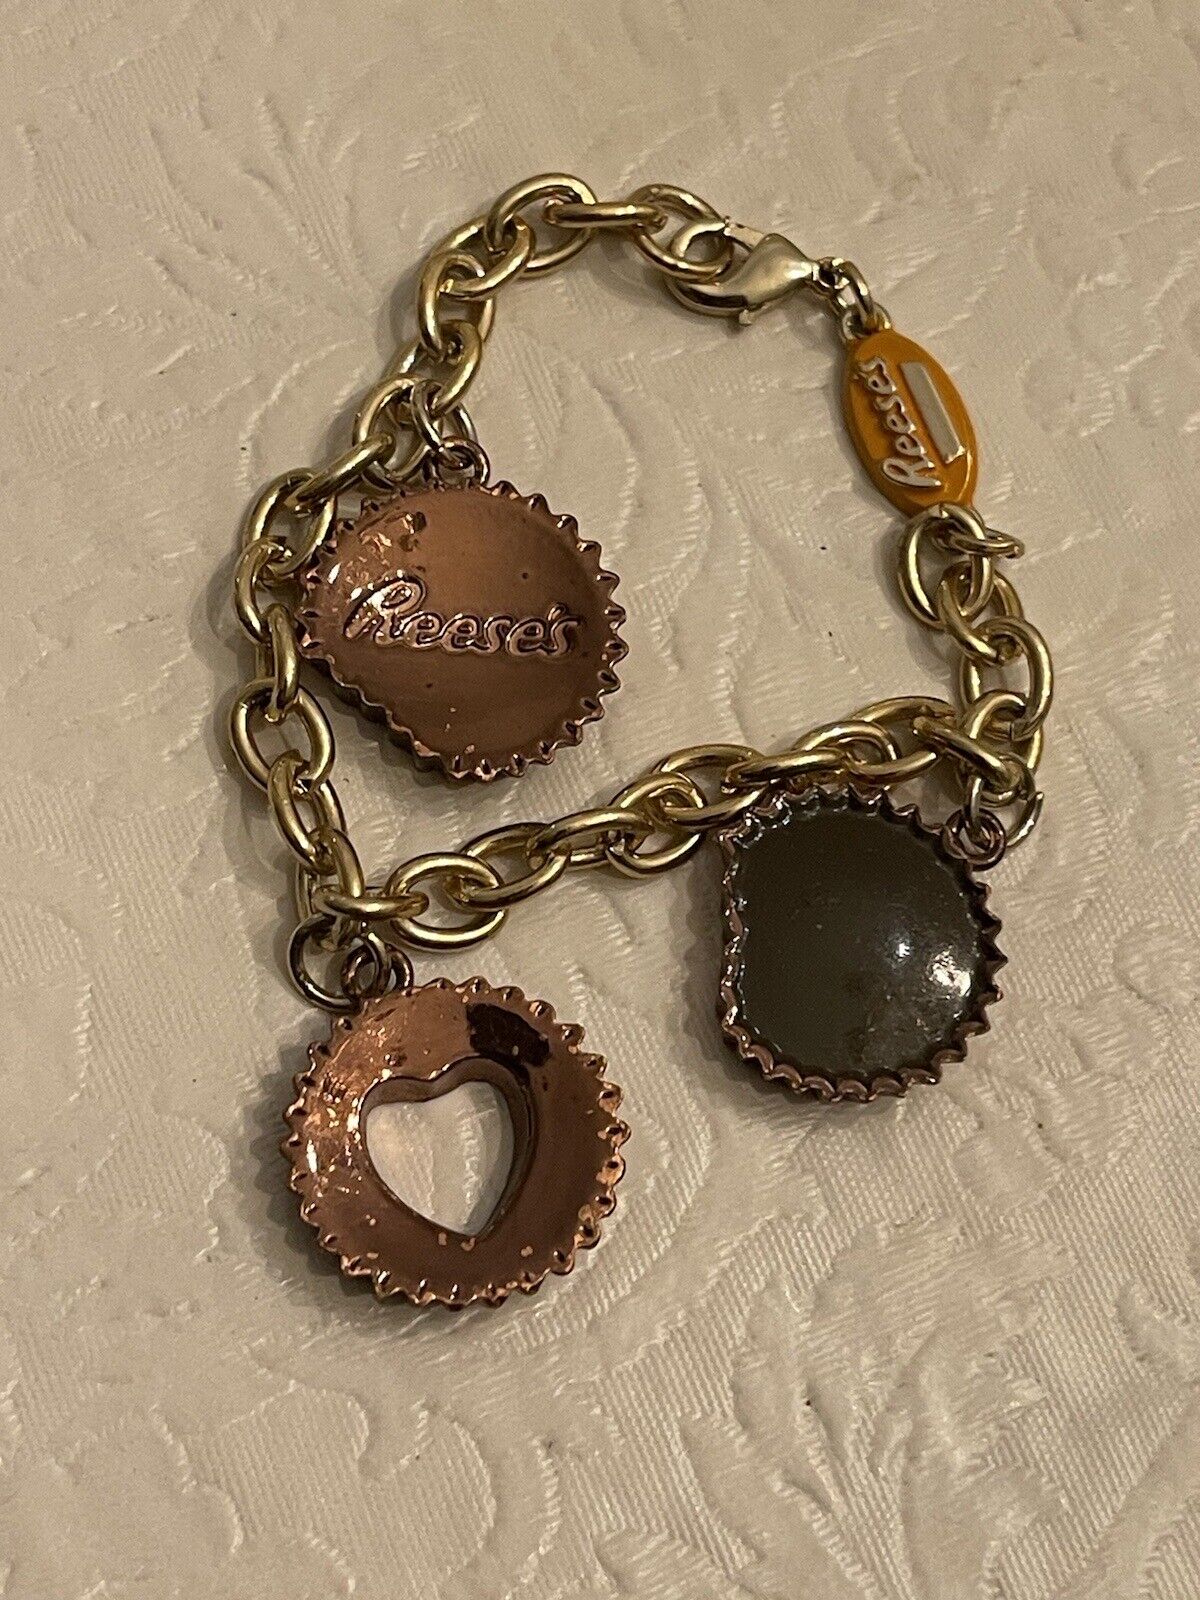 VINTAGE REESE’S Charm Bracelet PEANUT BUTTER CUP CANDY 6.5” - 7”